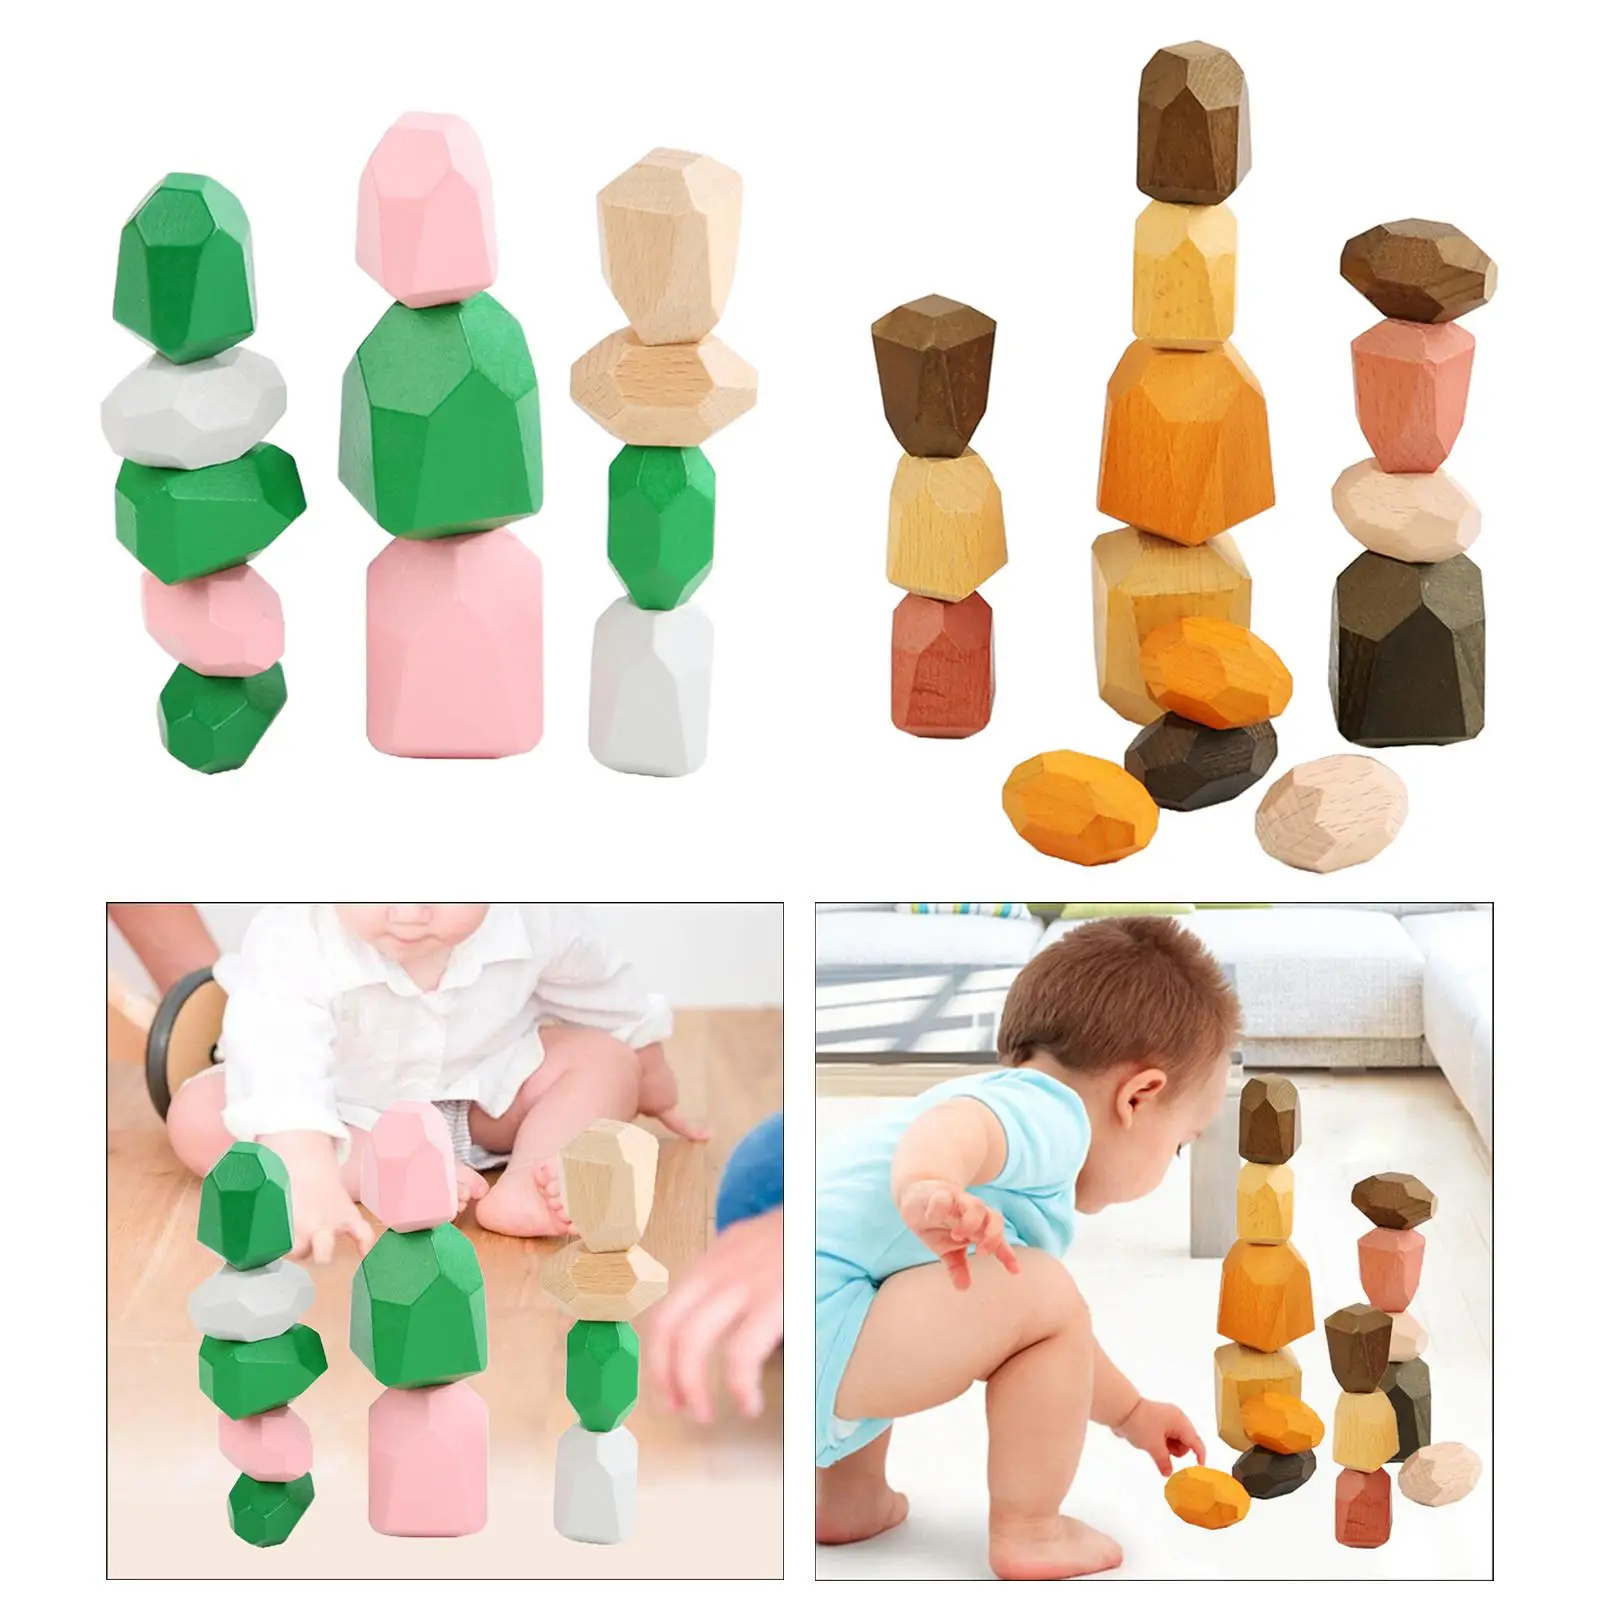 Baby Stacking Game Balancing Stone Interaction Toy Puzzle Toy Motor Skills Educational Colorful Kids Wooden Toys Ages 3 Years up